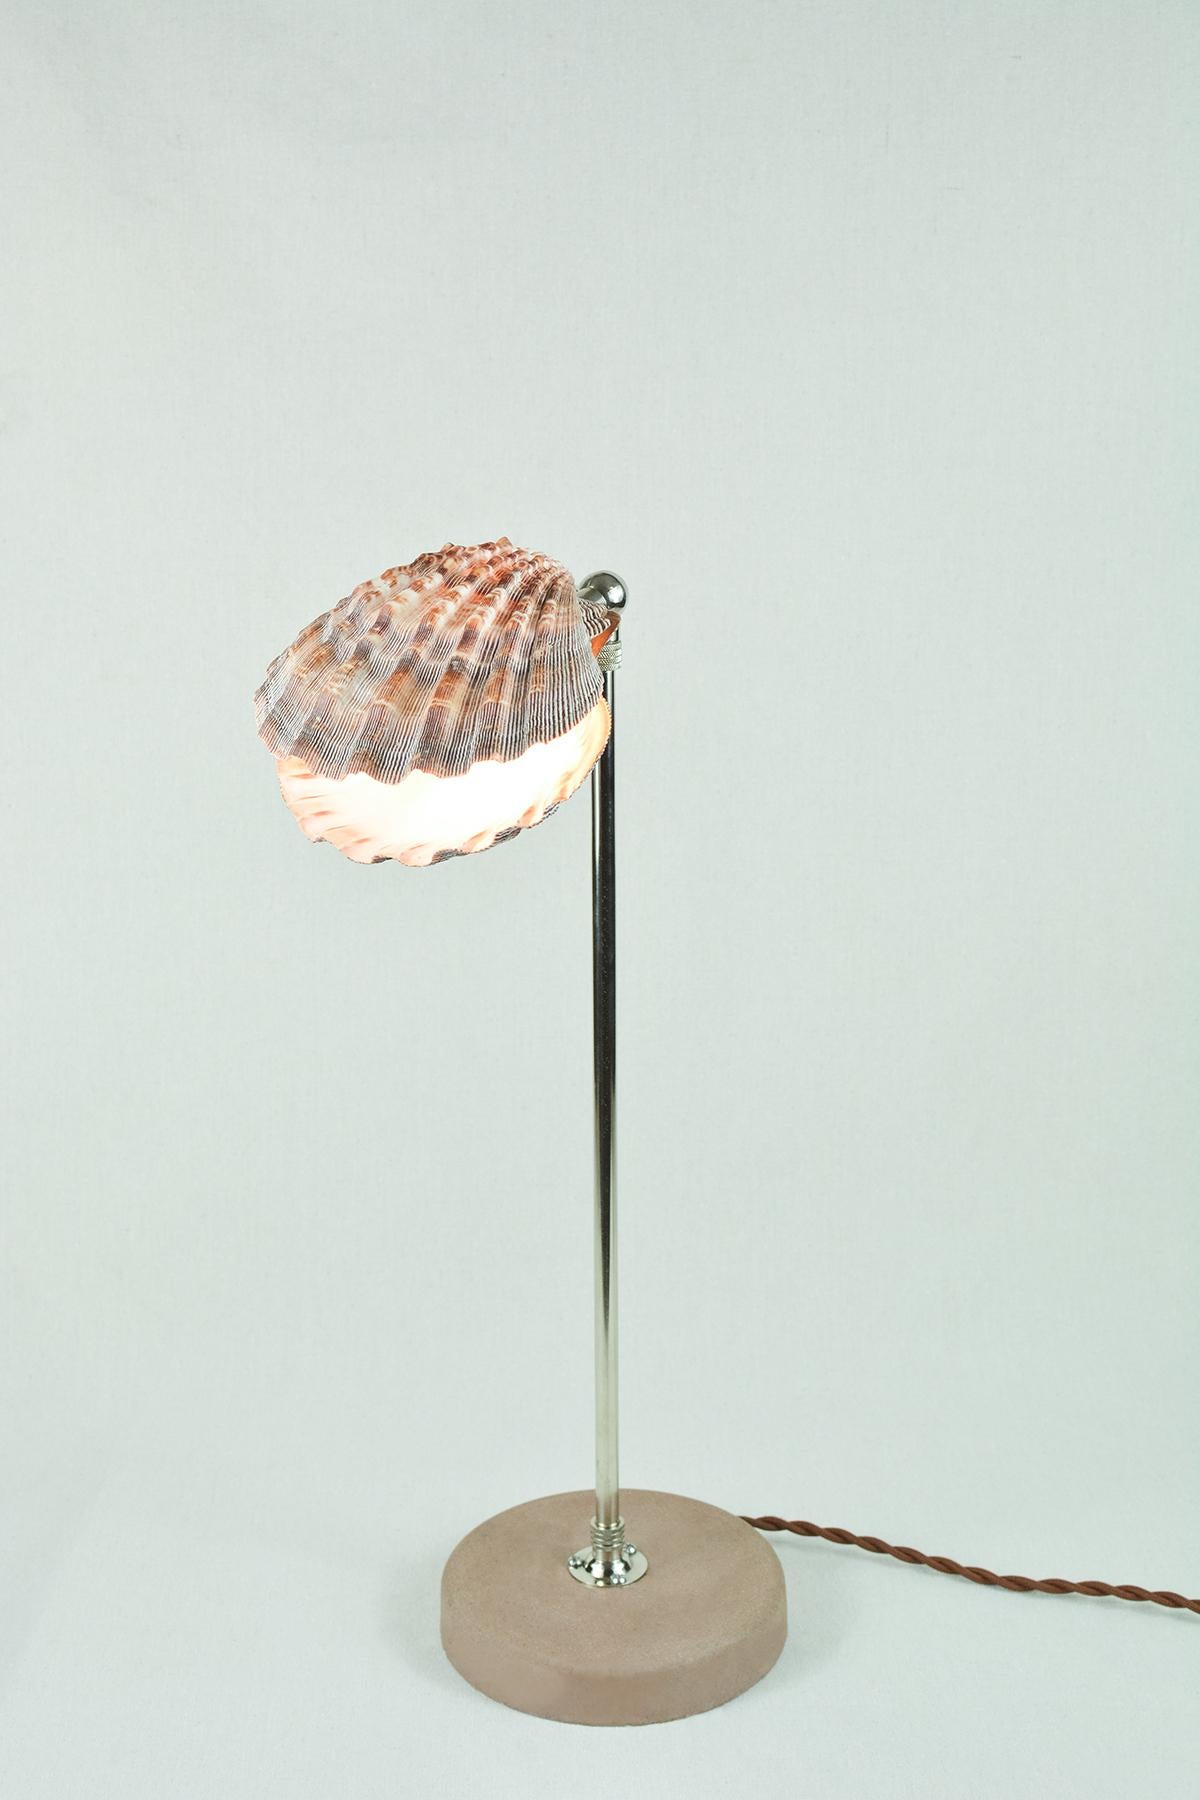 Cast 'Lavender Lion's Paw' Table Lamp in Nickel with Natural Scallop Shell Shade For Sale